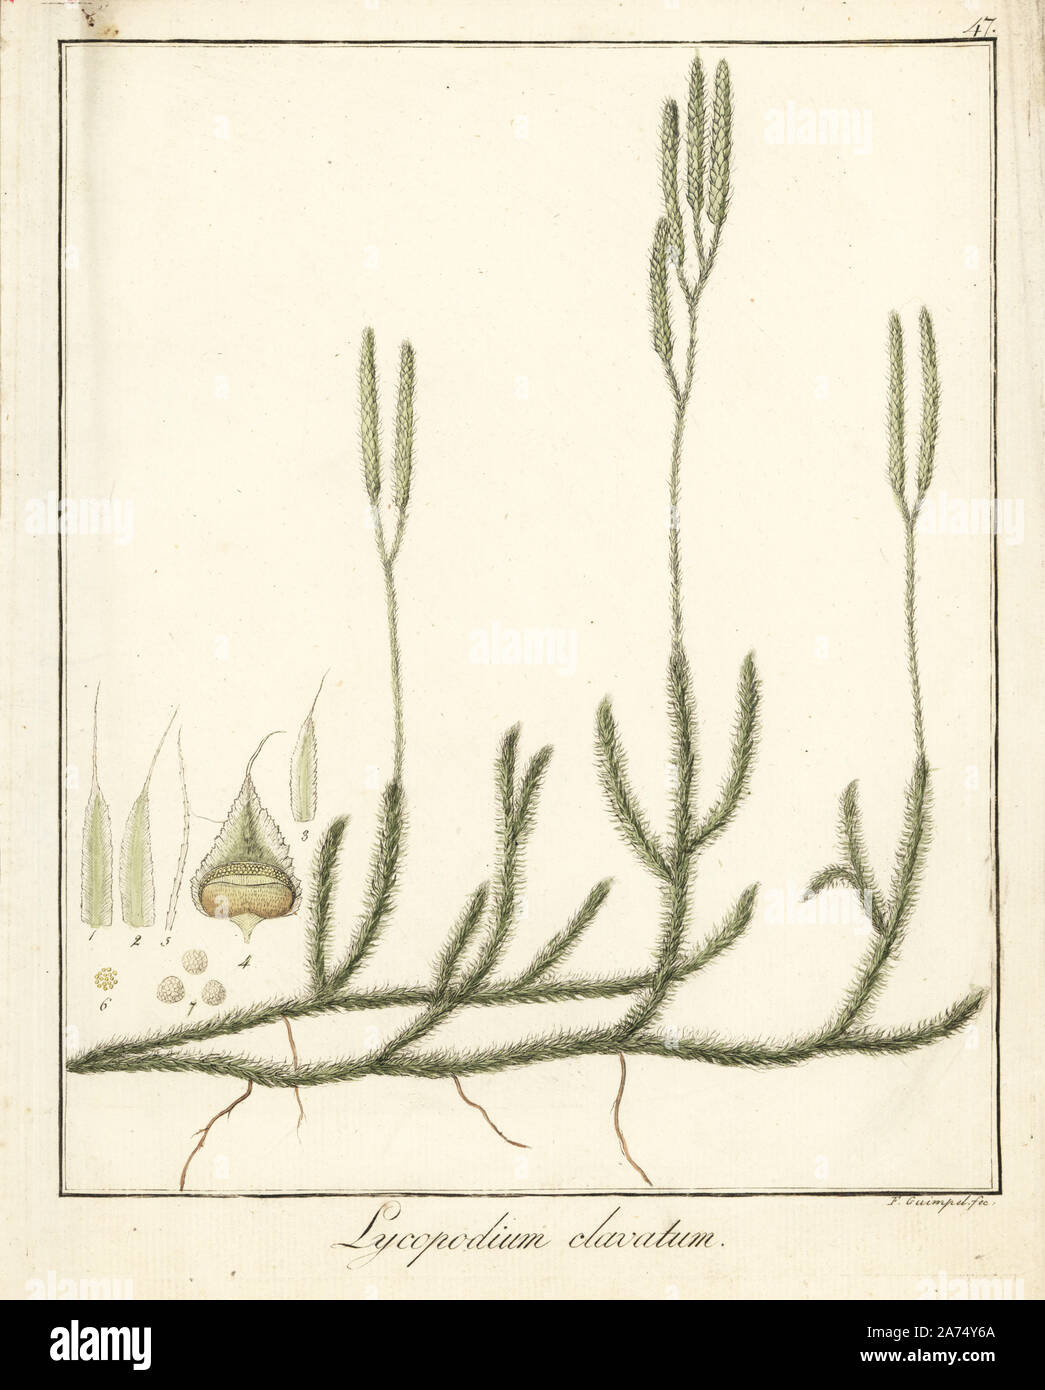 Wolf's-foot clubmoss, Lycopodium clavatum. Handcoloured copperplate  engraving by F. Guimpel from Dr. Friedrich Gottlob Hayne's Medical Botany,  Berlin, 1822. Hayne (1763-1832) was a German botanist, apothecary and  professor of pharmaceutical botany at